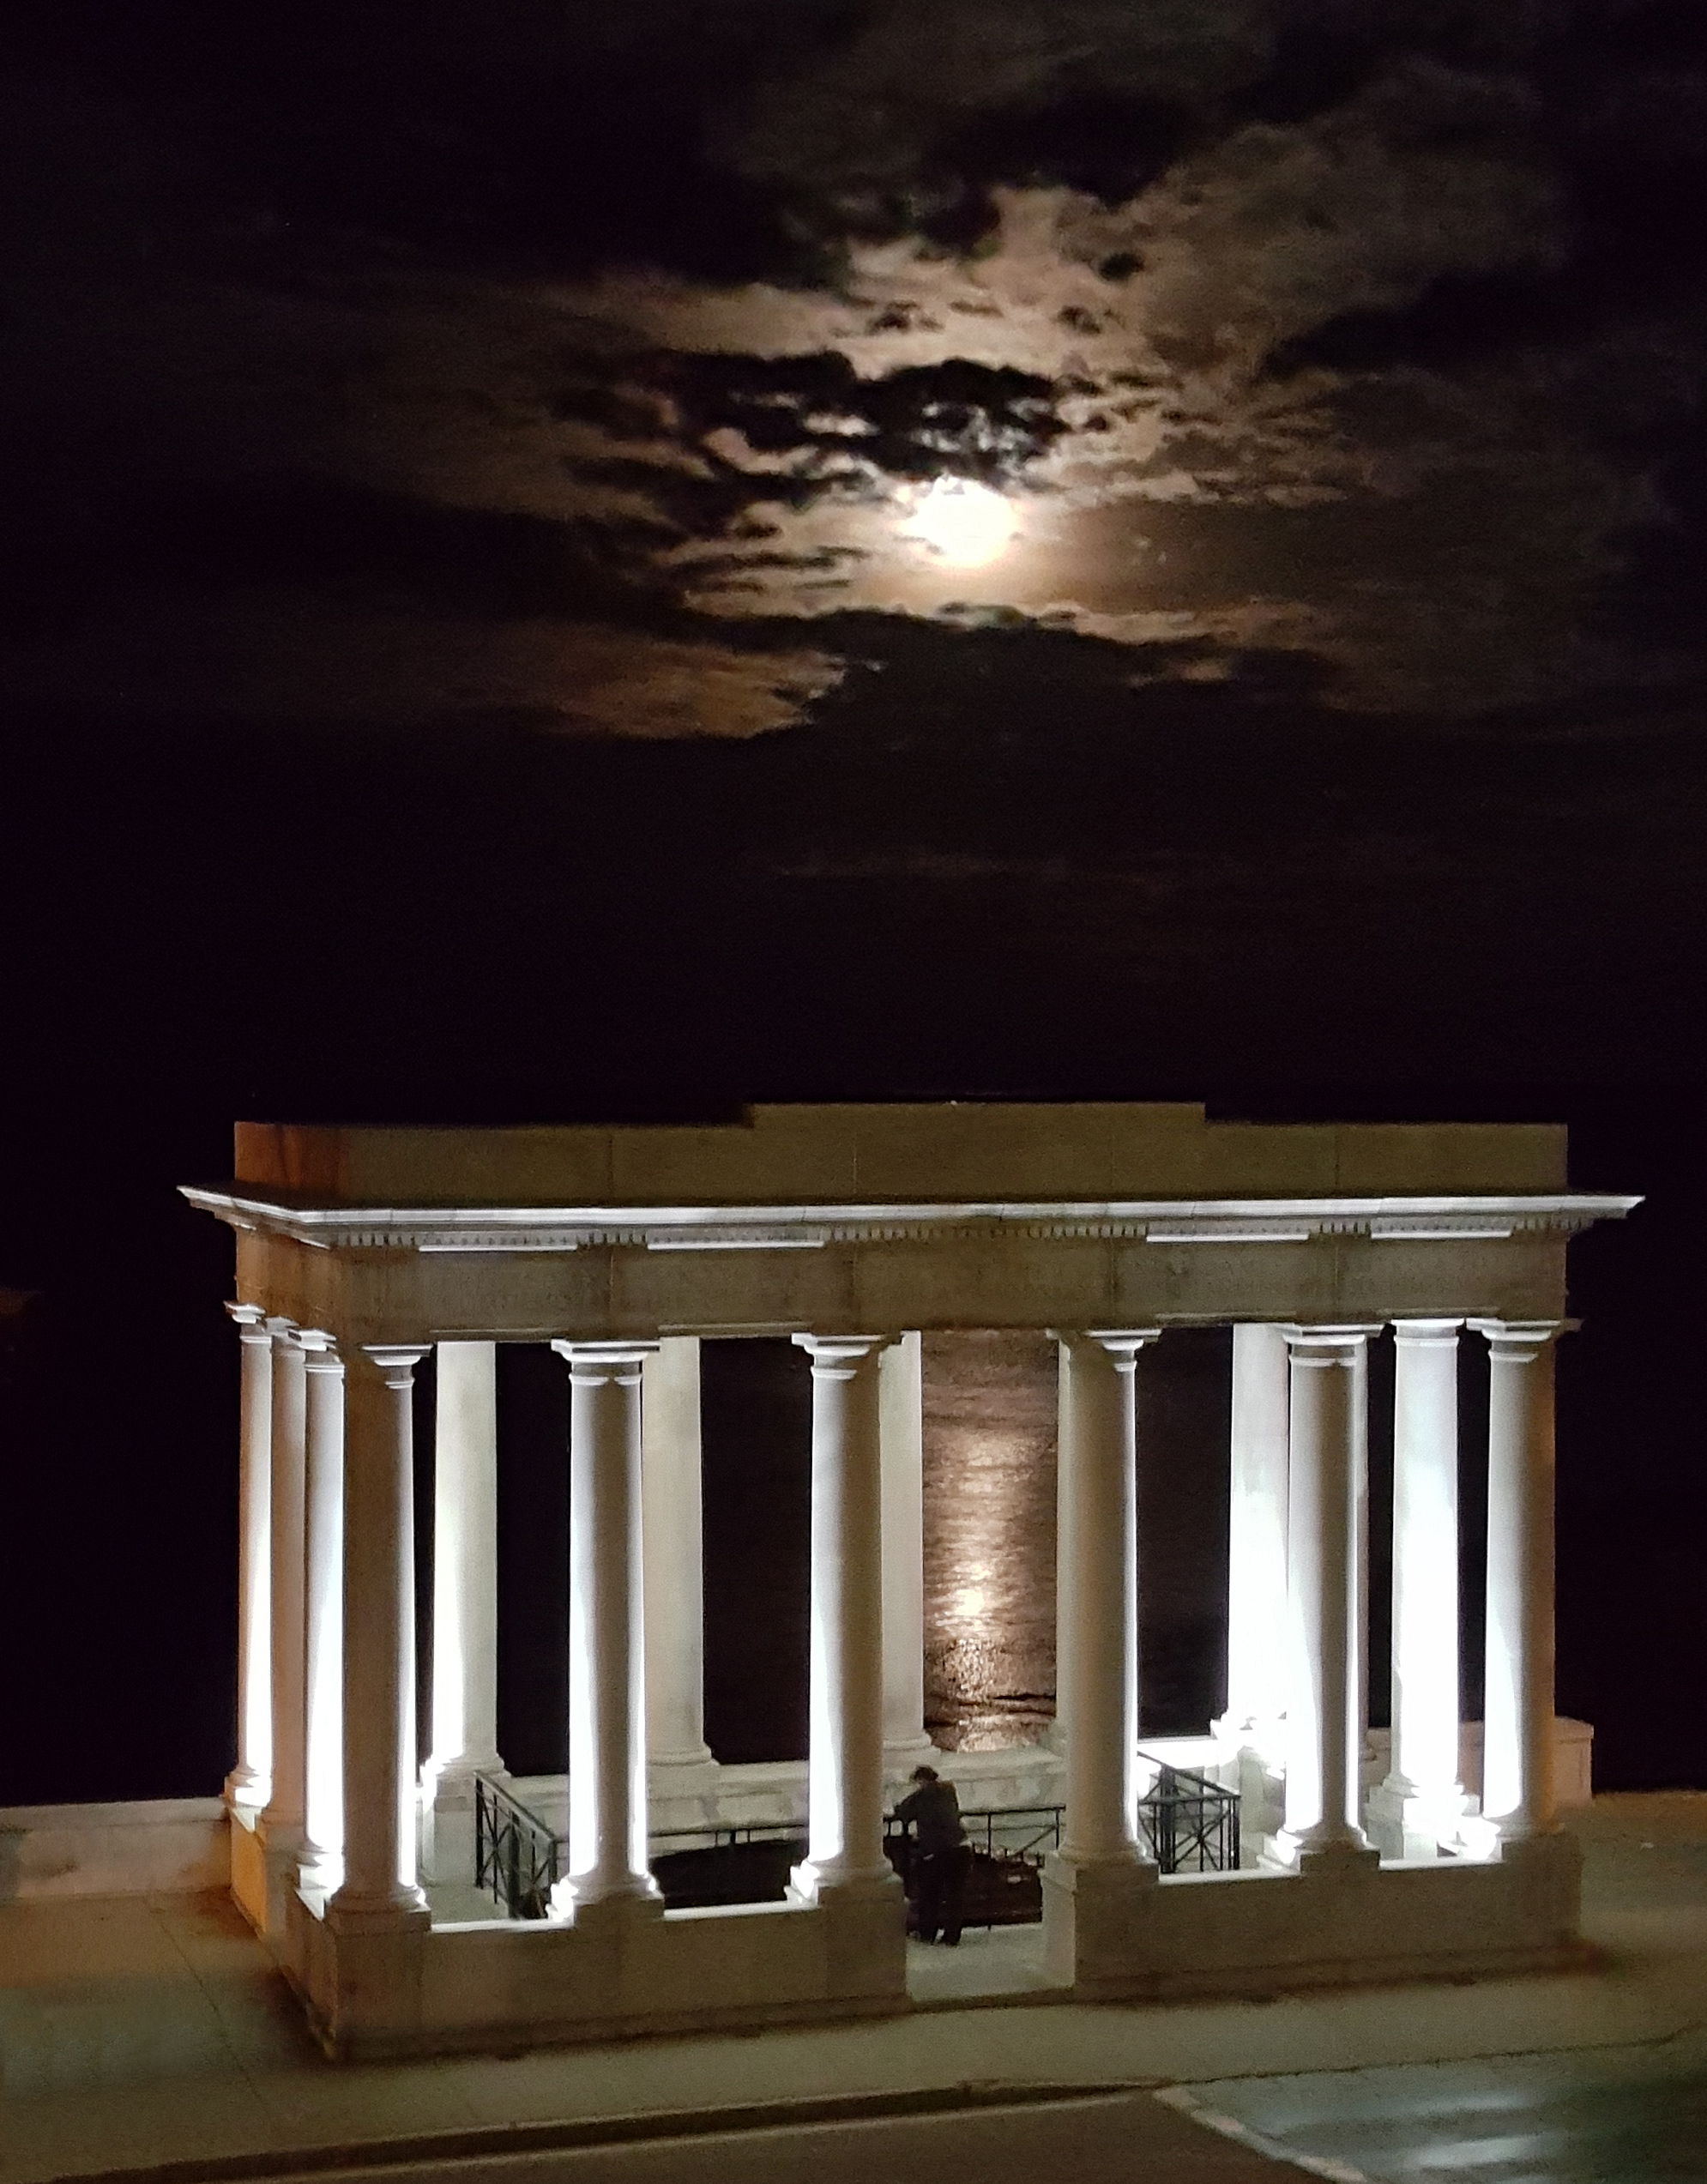 Full moon rising over Plymouth Rock